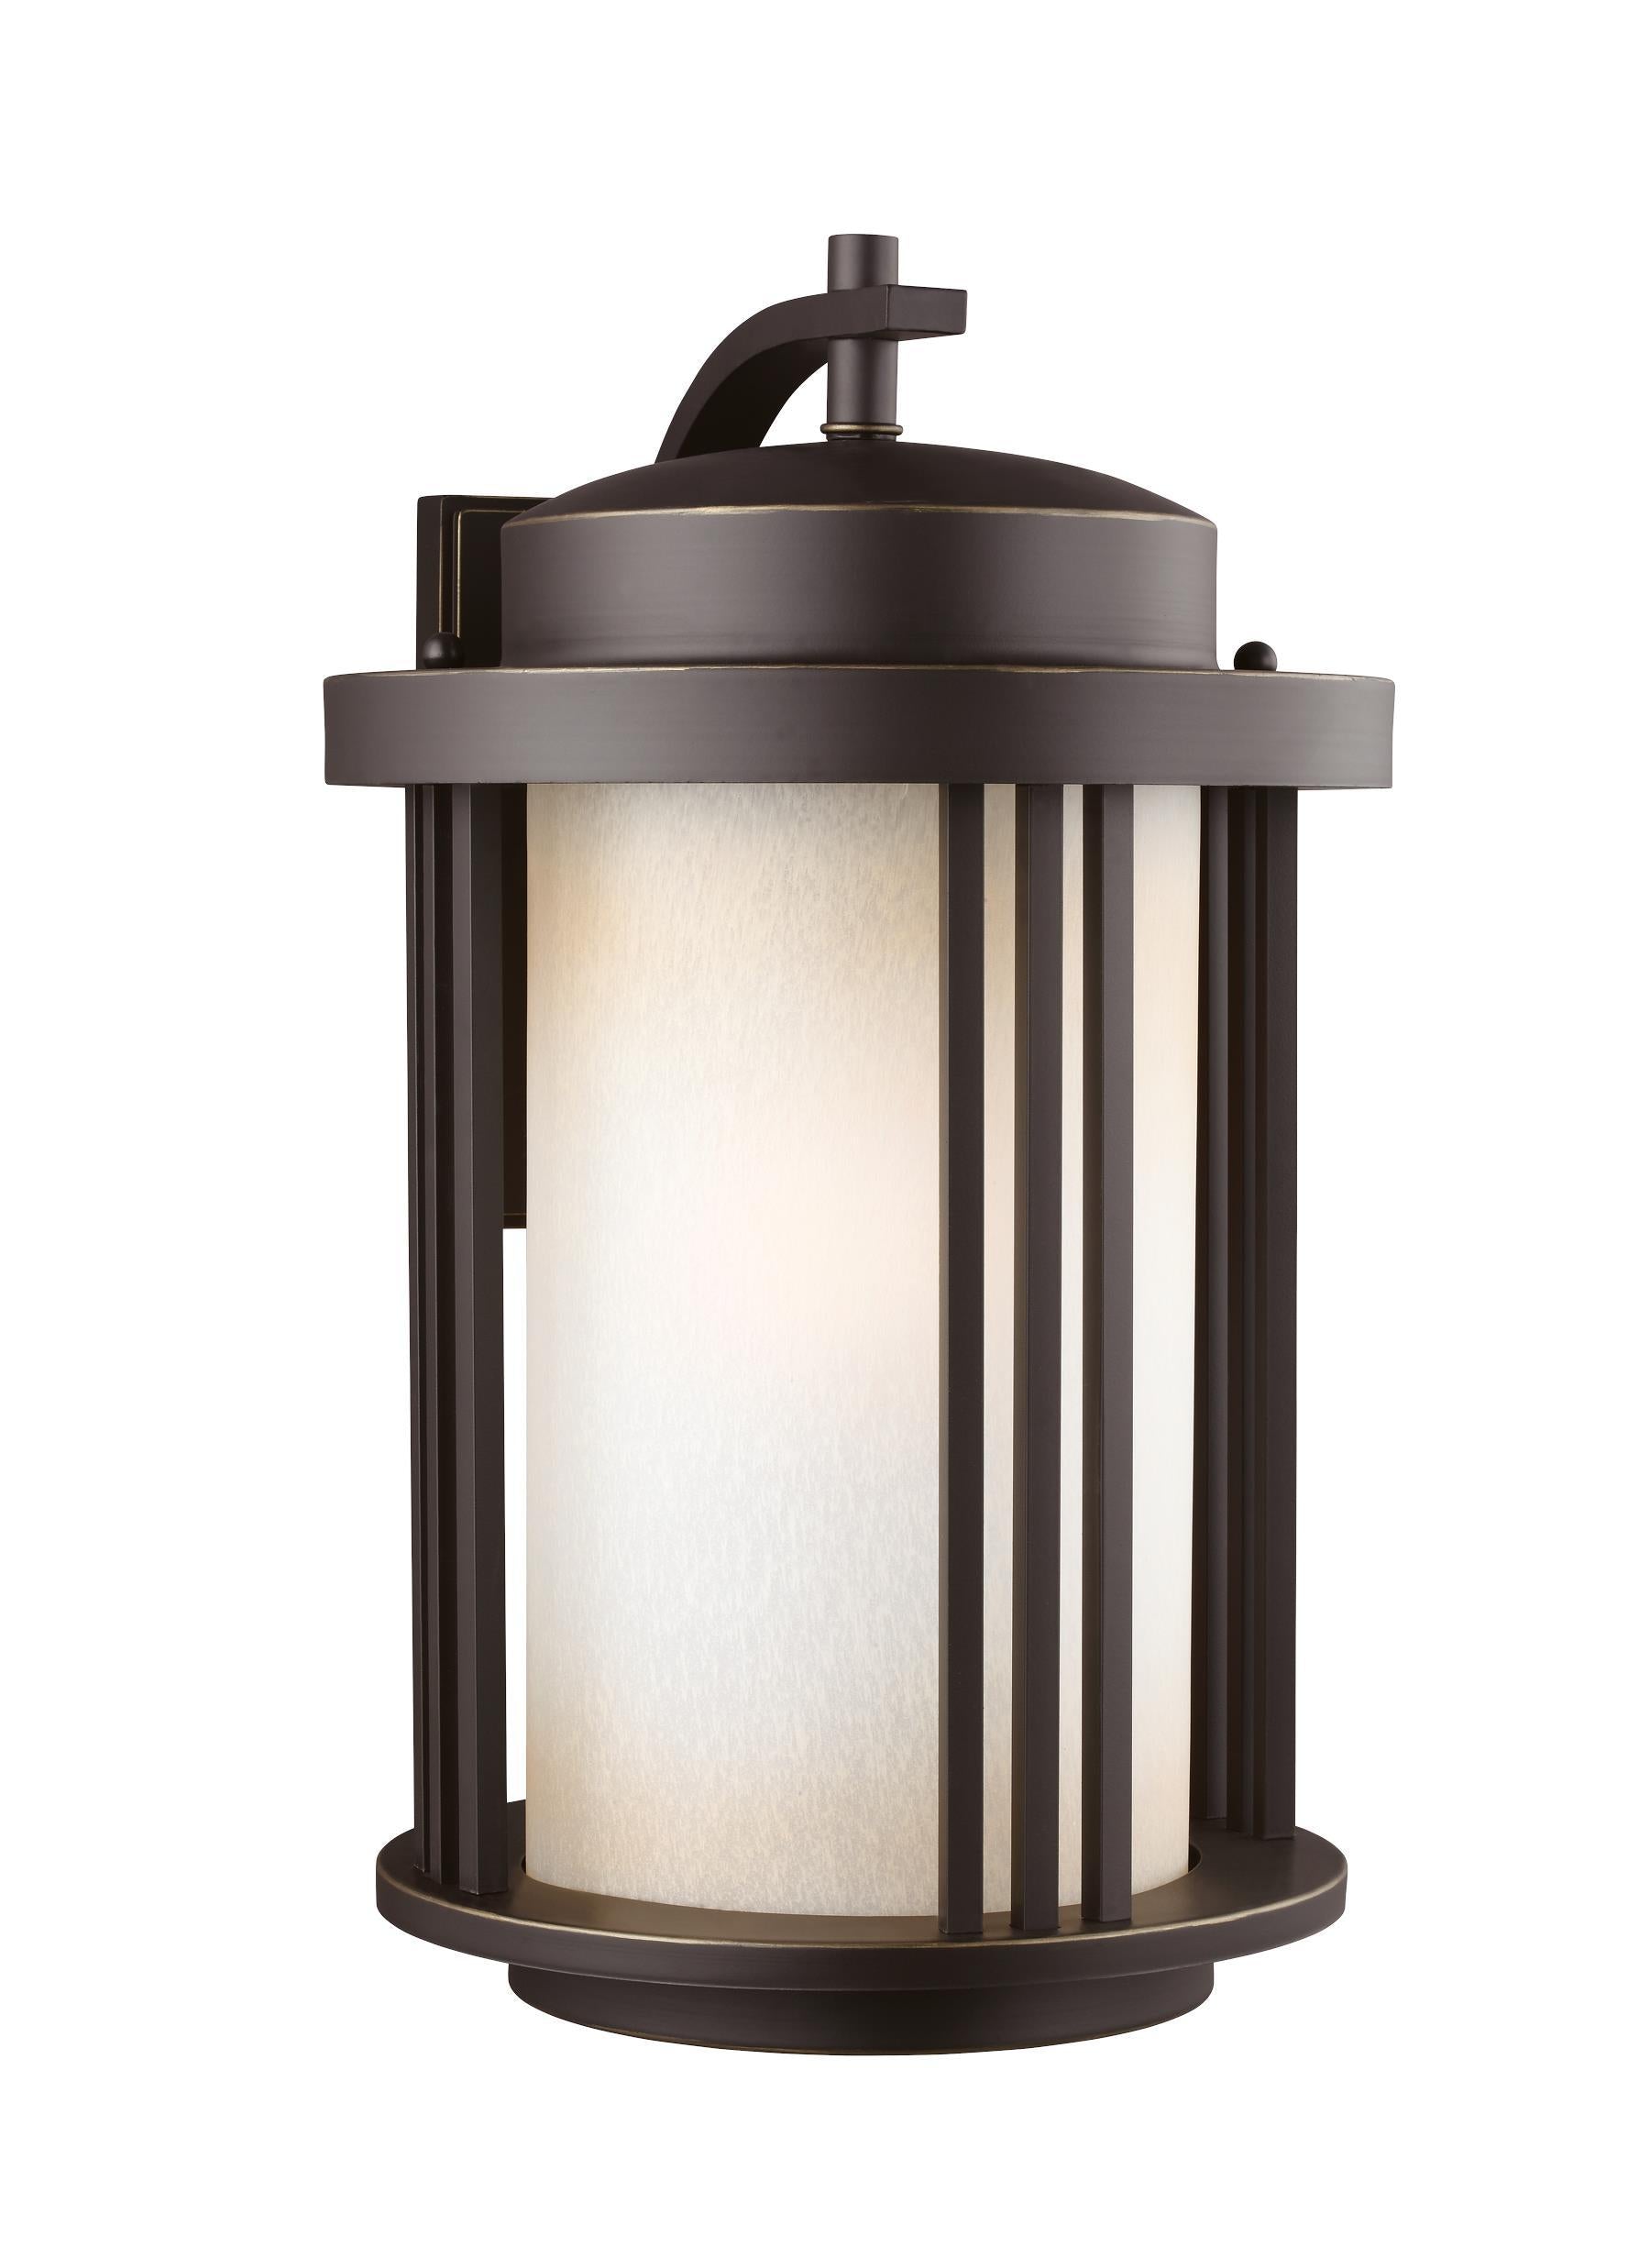 Crowell contemporary 1-light outdoor exterior large wall lantern sconce in antique bronze finish with creme parchment glas...